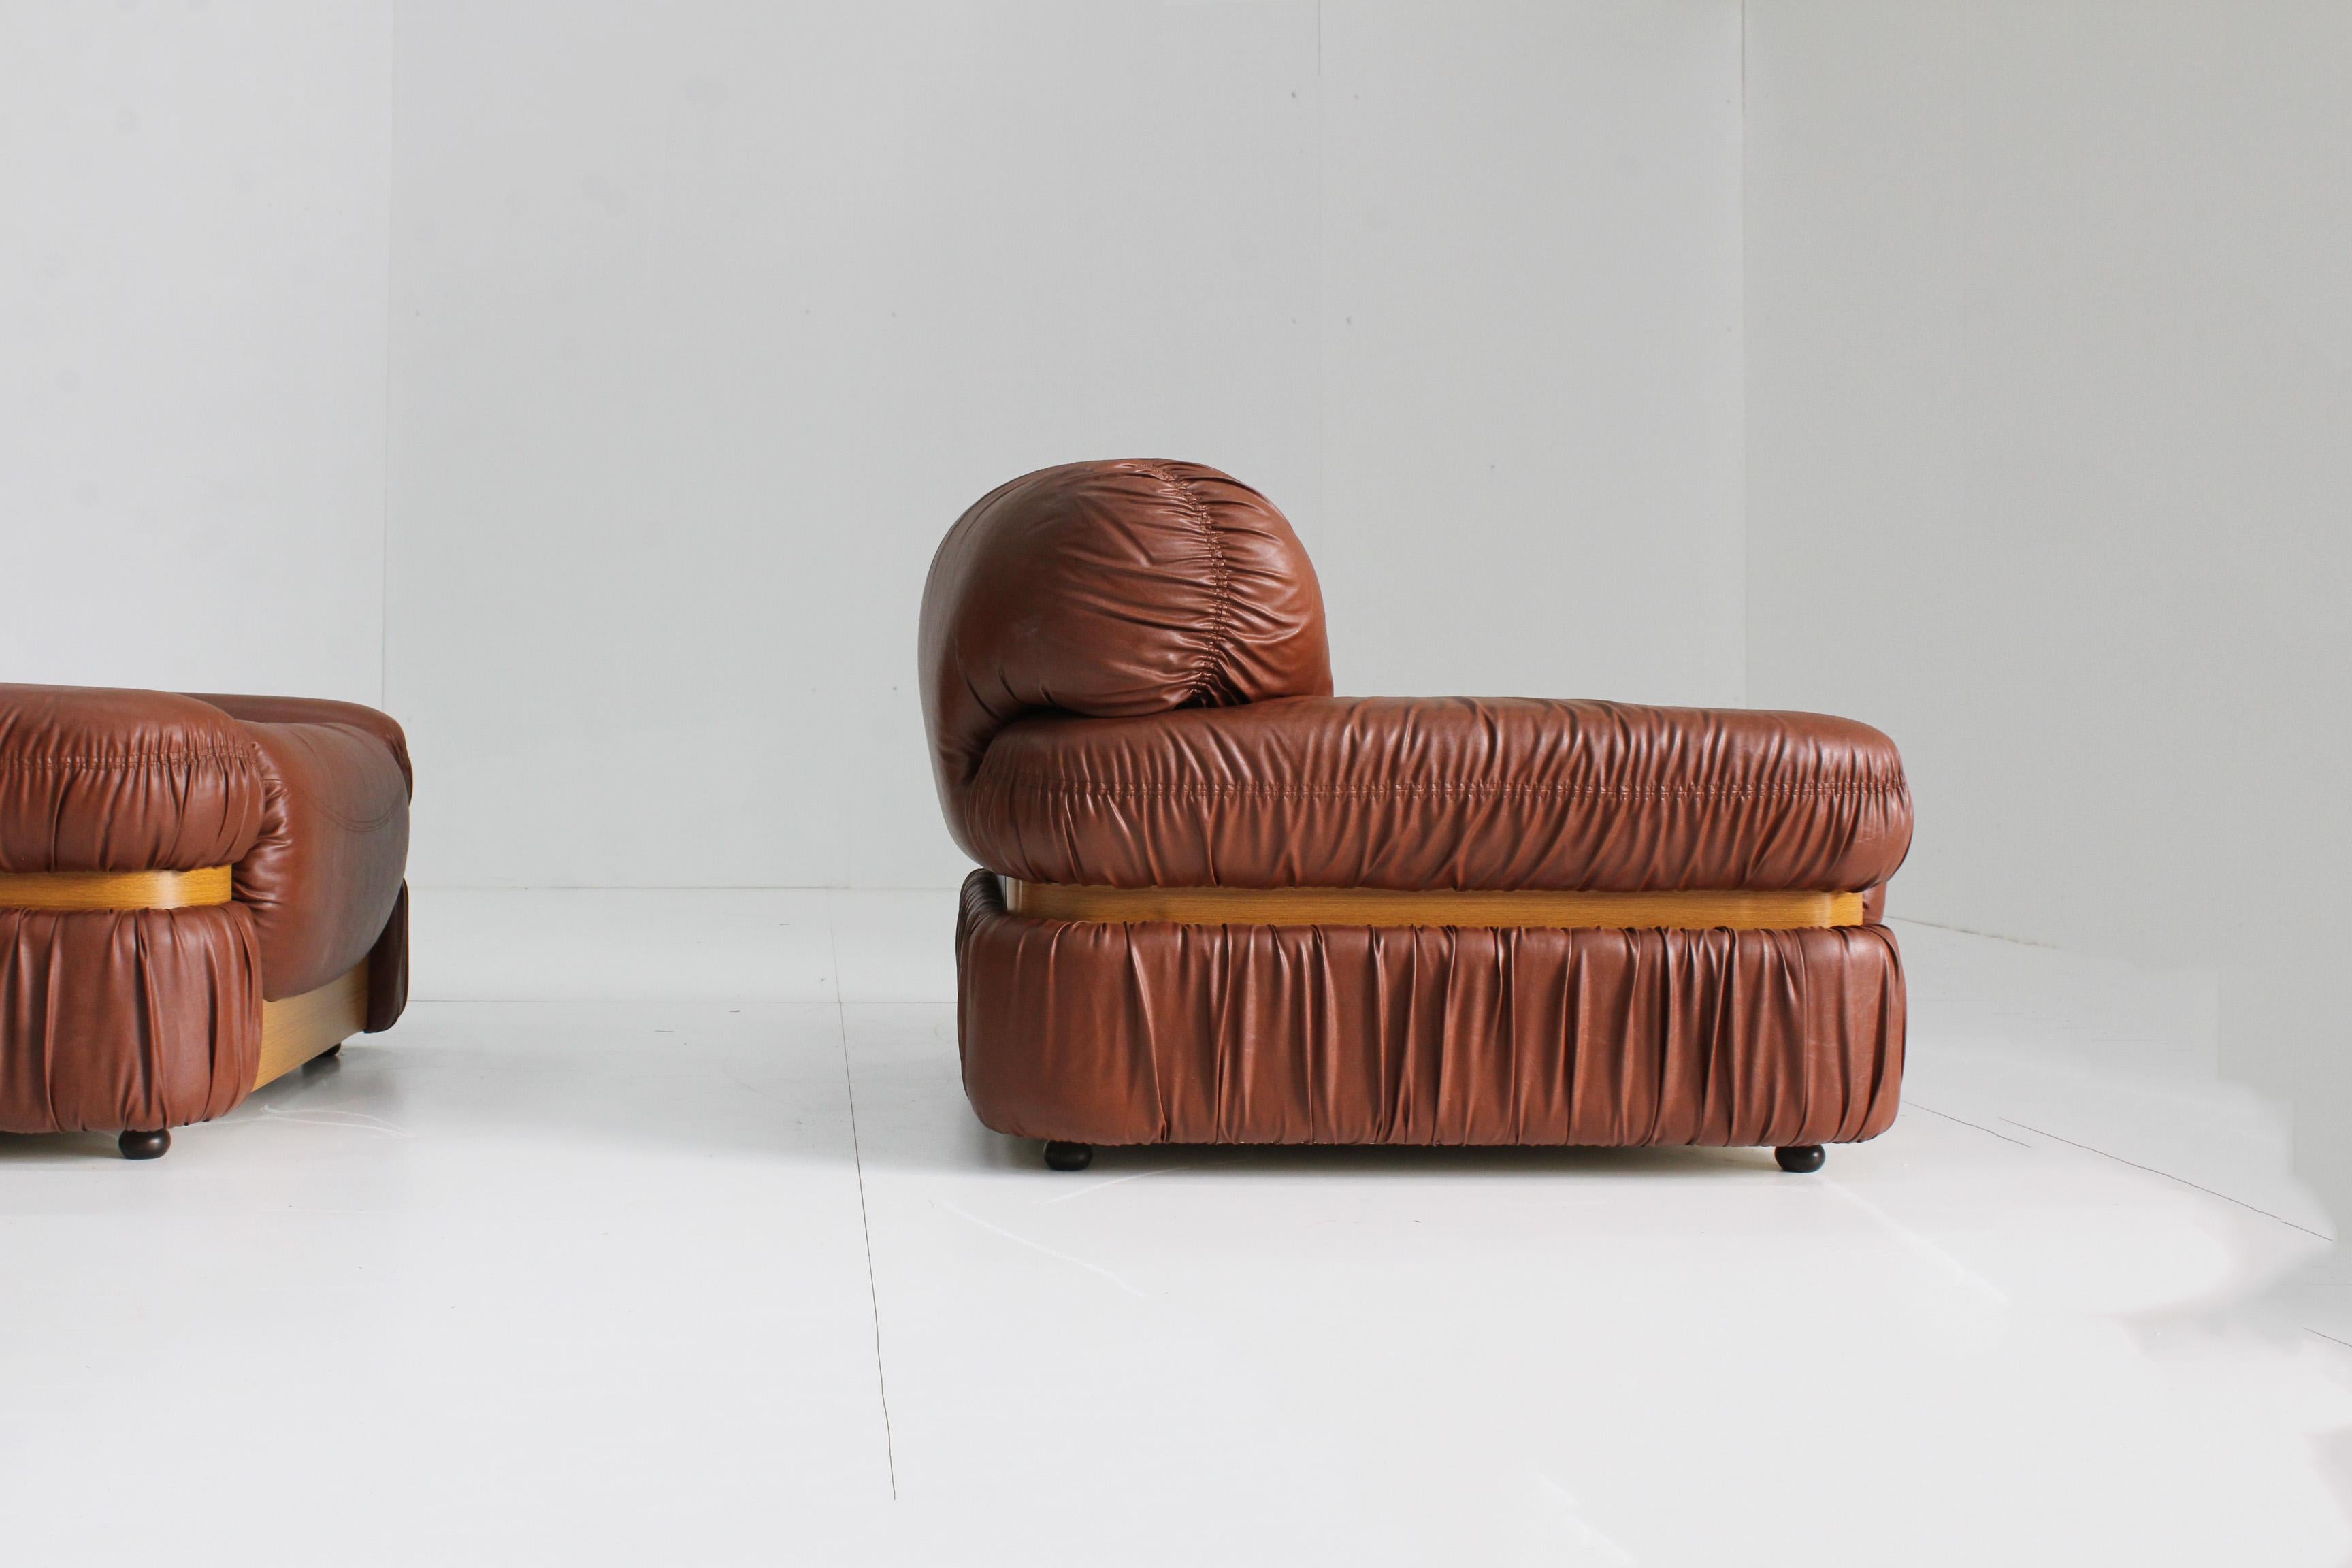 Set of 2 vintage Italian armchairs beautifully designed from the 1970s. These comfy chairs are in a very good condition with minor traces of use.
Cognac faux leather with wooden details.